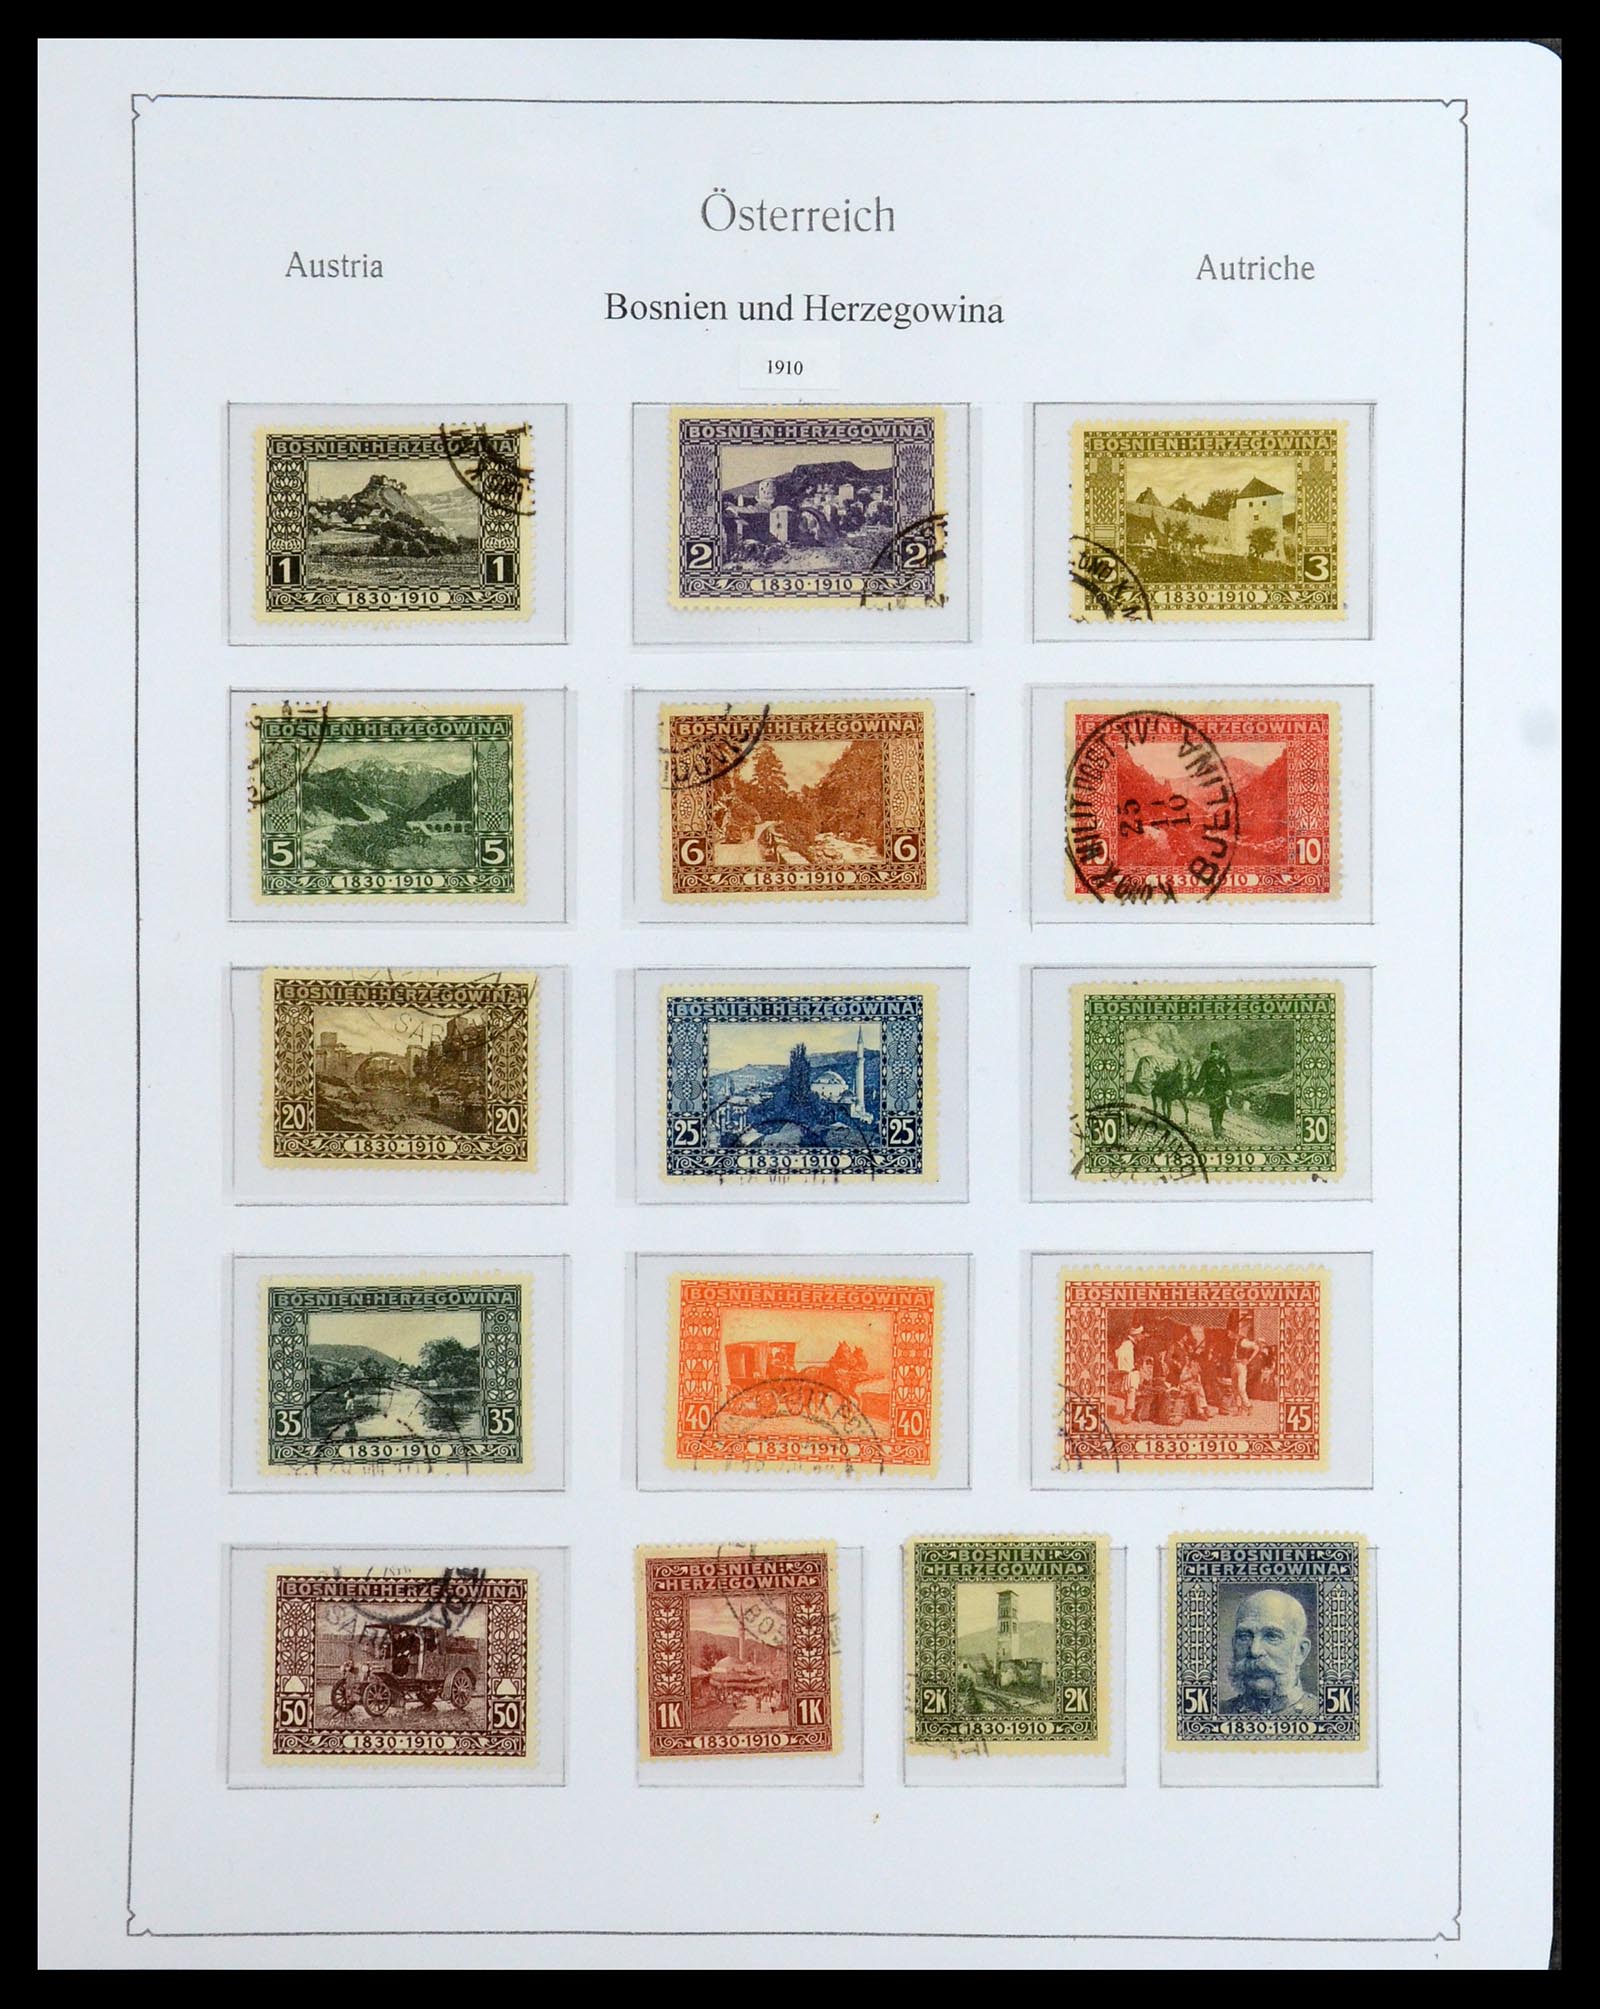 36364 009 - Stamp collection 36364 Austrian territories 1879-1918.